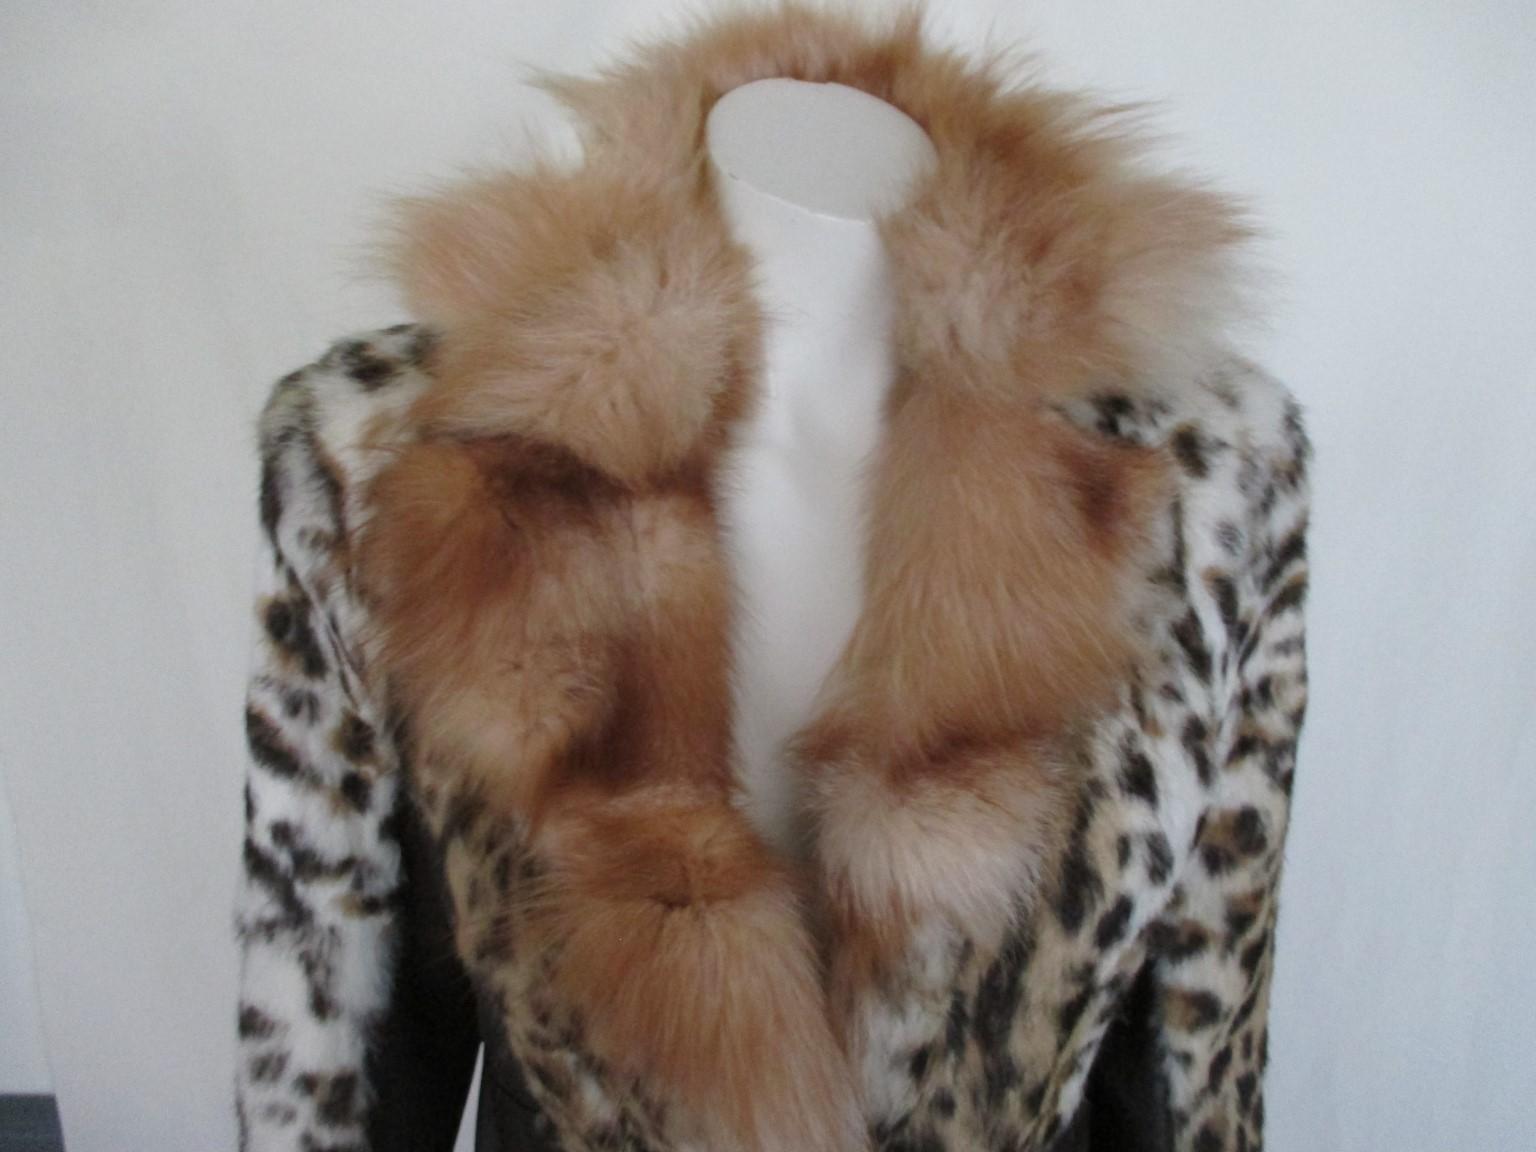 Panther printed Leopard Lapin Leather fur coat with fox collar

We offer more exclusive fur items, view our front store

Details:
2 pockets, 2 buttons, no belt,  fully lined
Soft fur and soft leather
Size is aprox. small/medium please check